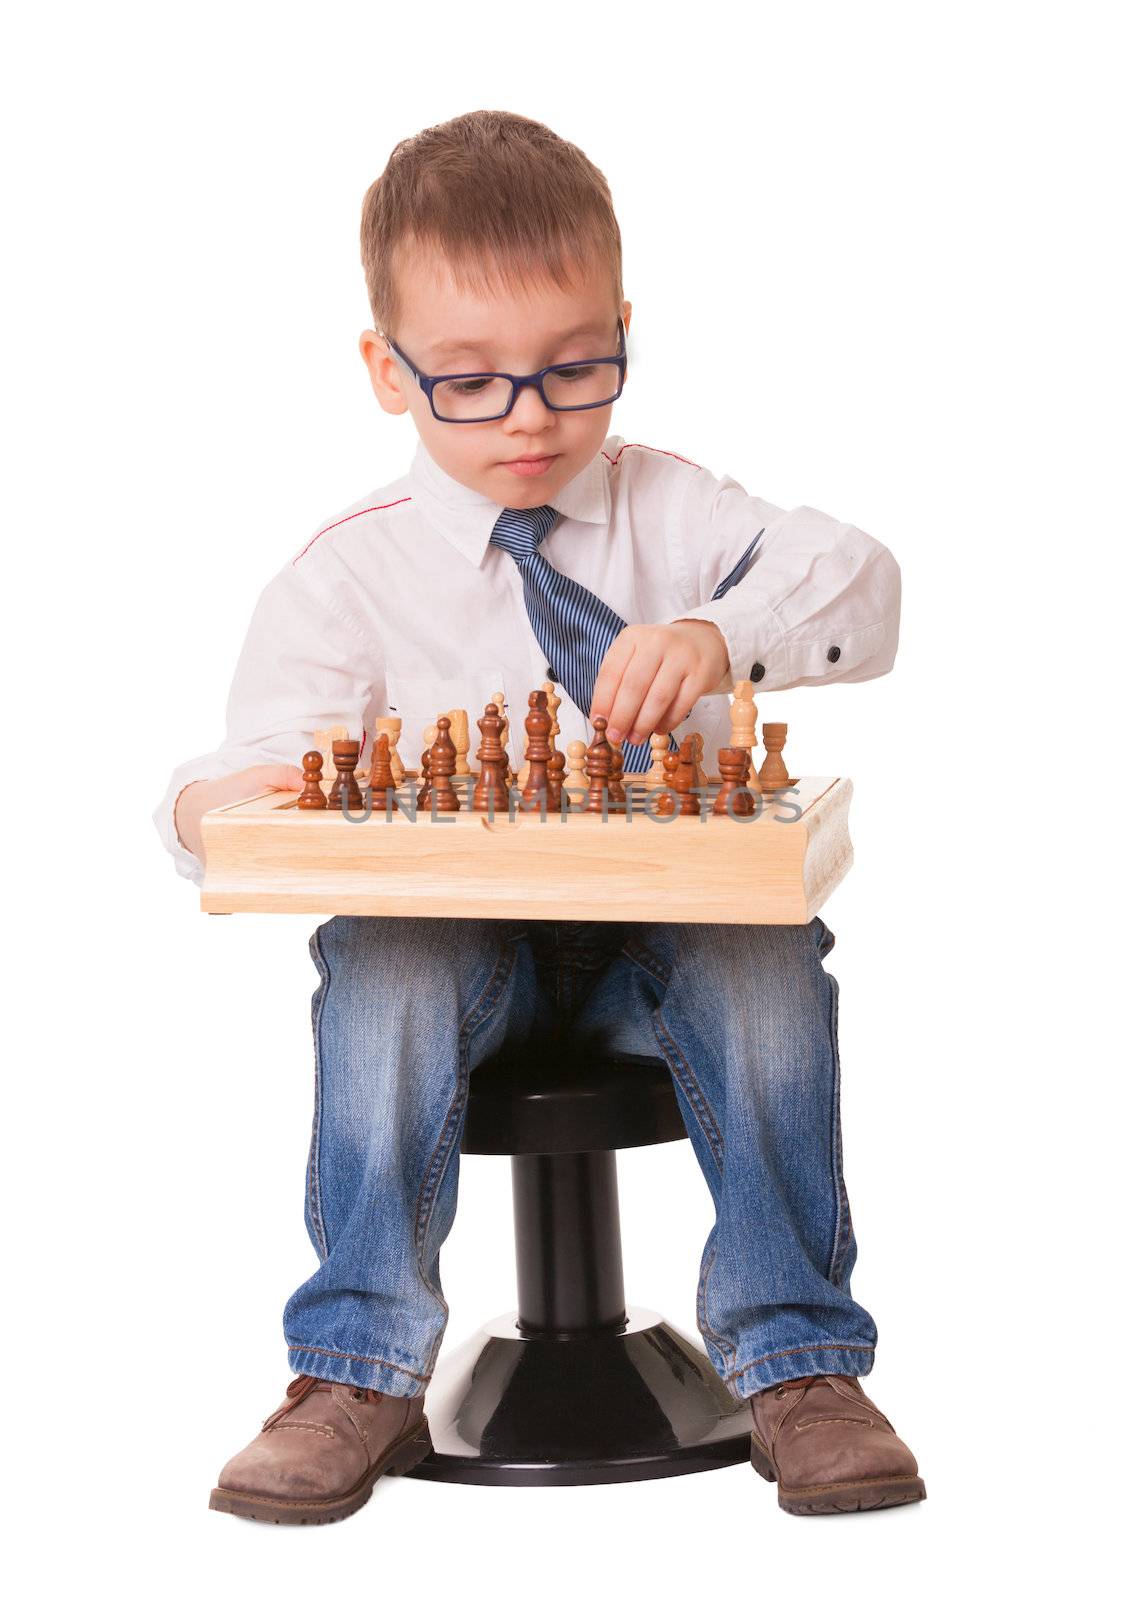 Serious kid playing chess, isolated on white background. 